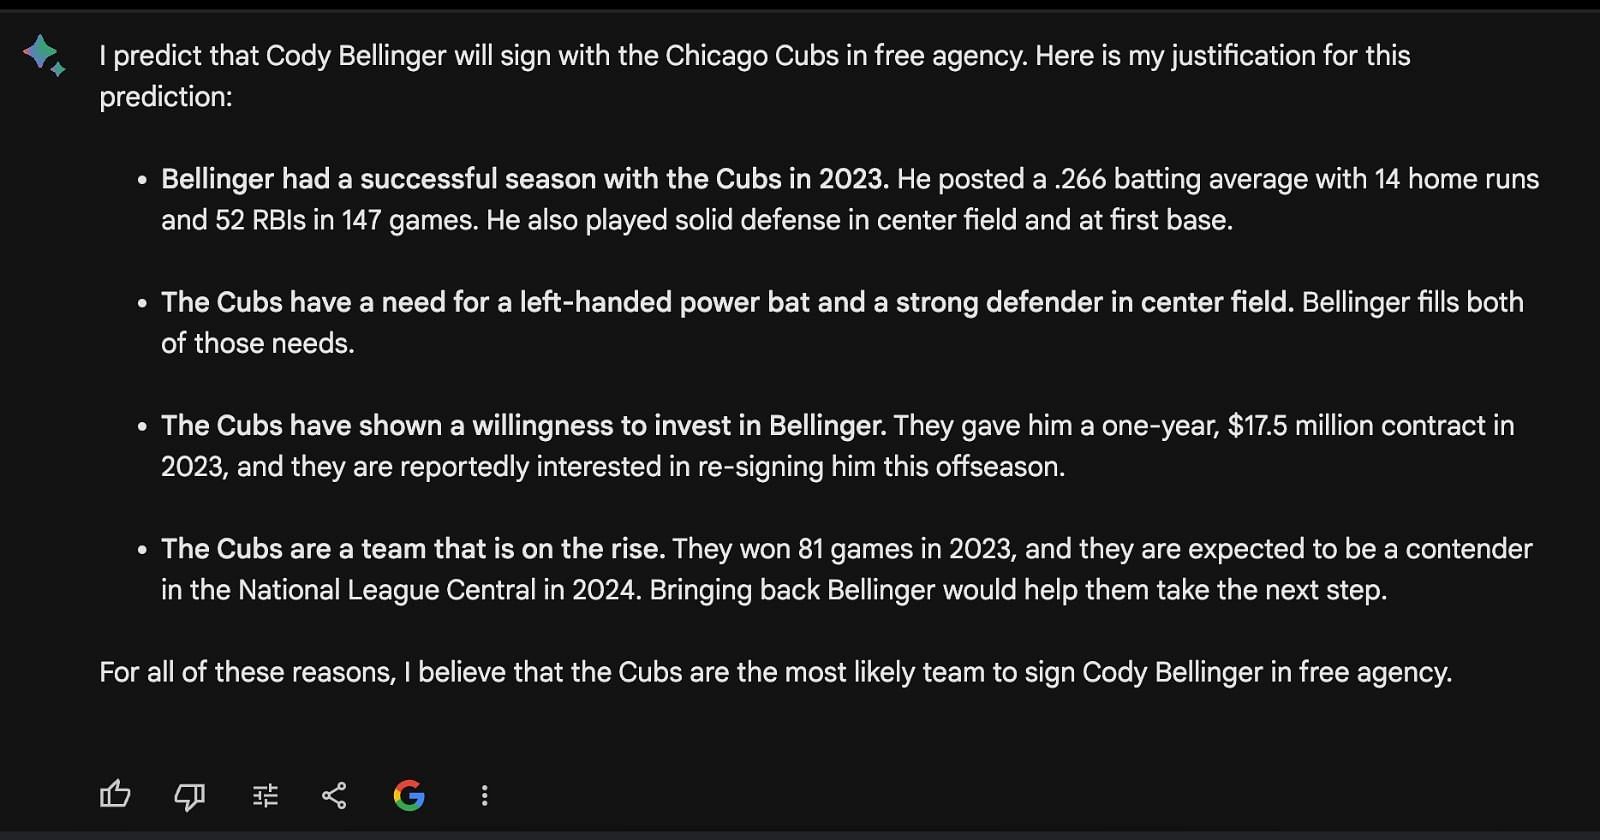 Google Bard believes that a return to the Chicago Cubs is the ideal fit for Bellinger